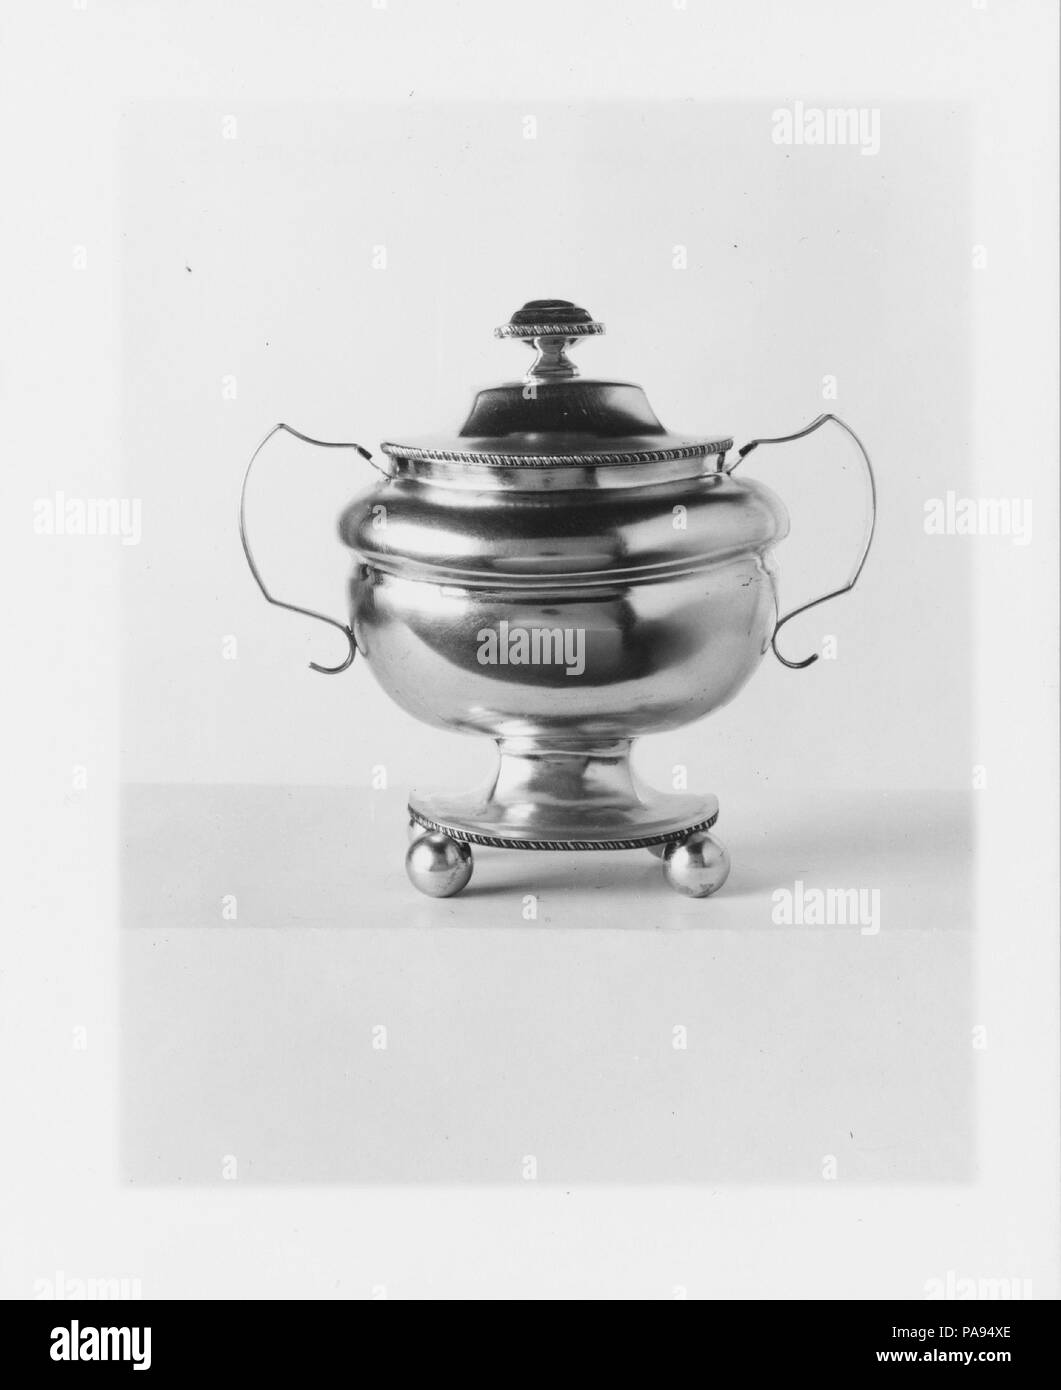 Sugar Bowl. Culture: American. Dimensions: Overall: 7 3/4 x 8 3/8 x 5 1/8 in. (19.7 x 21.3 x 13 cm); 15 oz. 10 dwt. (482 g)  Body: H. 6 3/16 in. (15.7 cm); 12 oz. 3 dwt. (377.9 g)  Cover: 2 1/8 x 4 9/16 x 3 15/16 in. (5.4 x 11.6 x 10 cm); 3 oz. 7 dwt. (104.1 g). Maker: William B. Heyer (active ca. 1807-22). Retailer: Hyde and Nevins (active ca. 1814-19). Date: ca. 1815. Museum: Metropolitan Museum of Art, New York, USA. Stock Photo